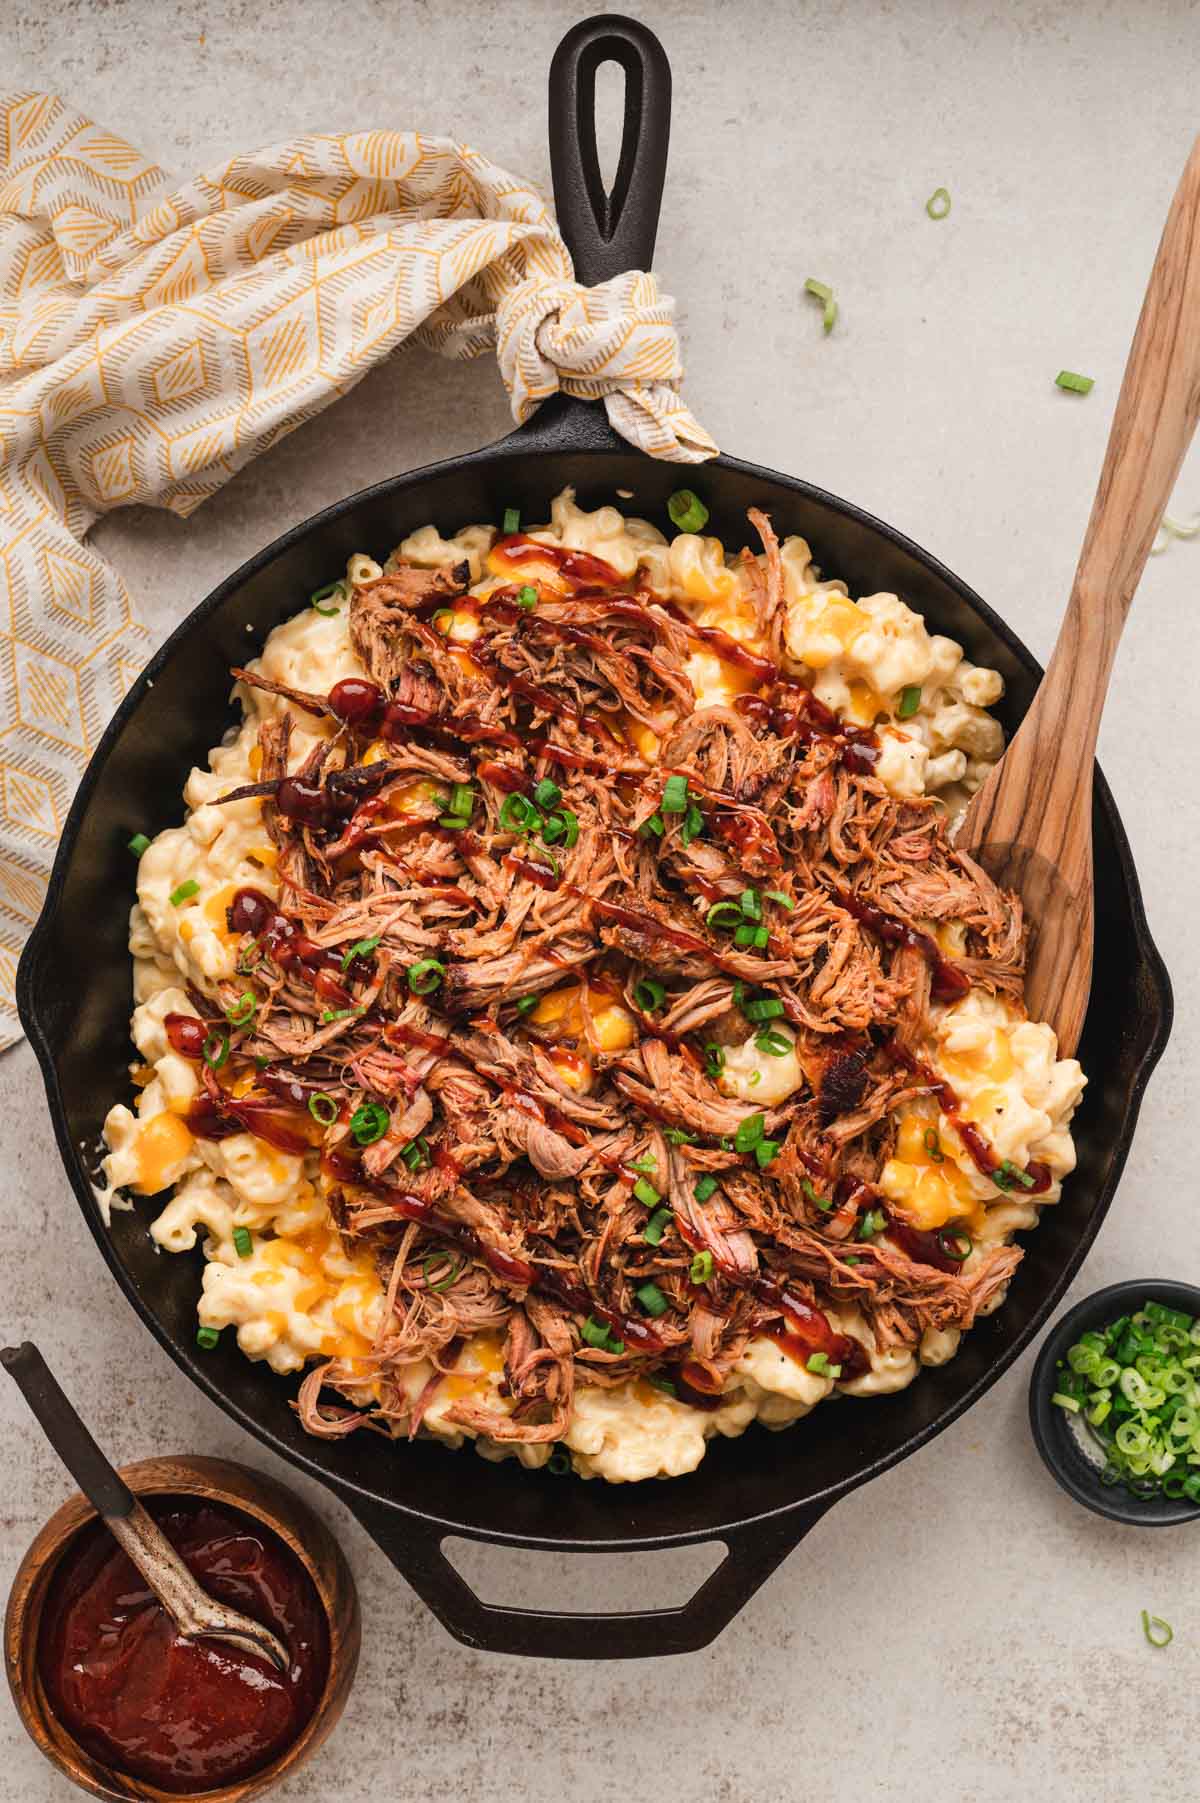 Mac and cheese in a cast iron skillet topped with bbq pulled pork, and with a wooden spoon.